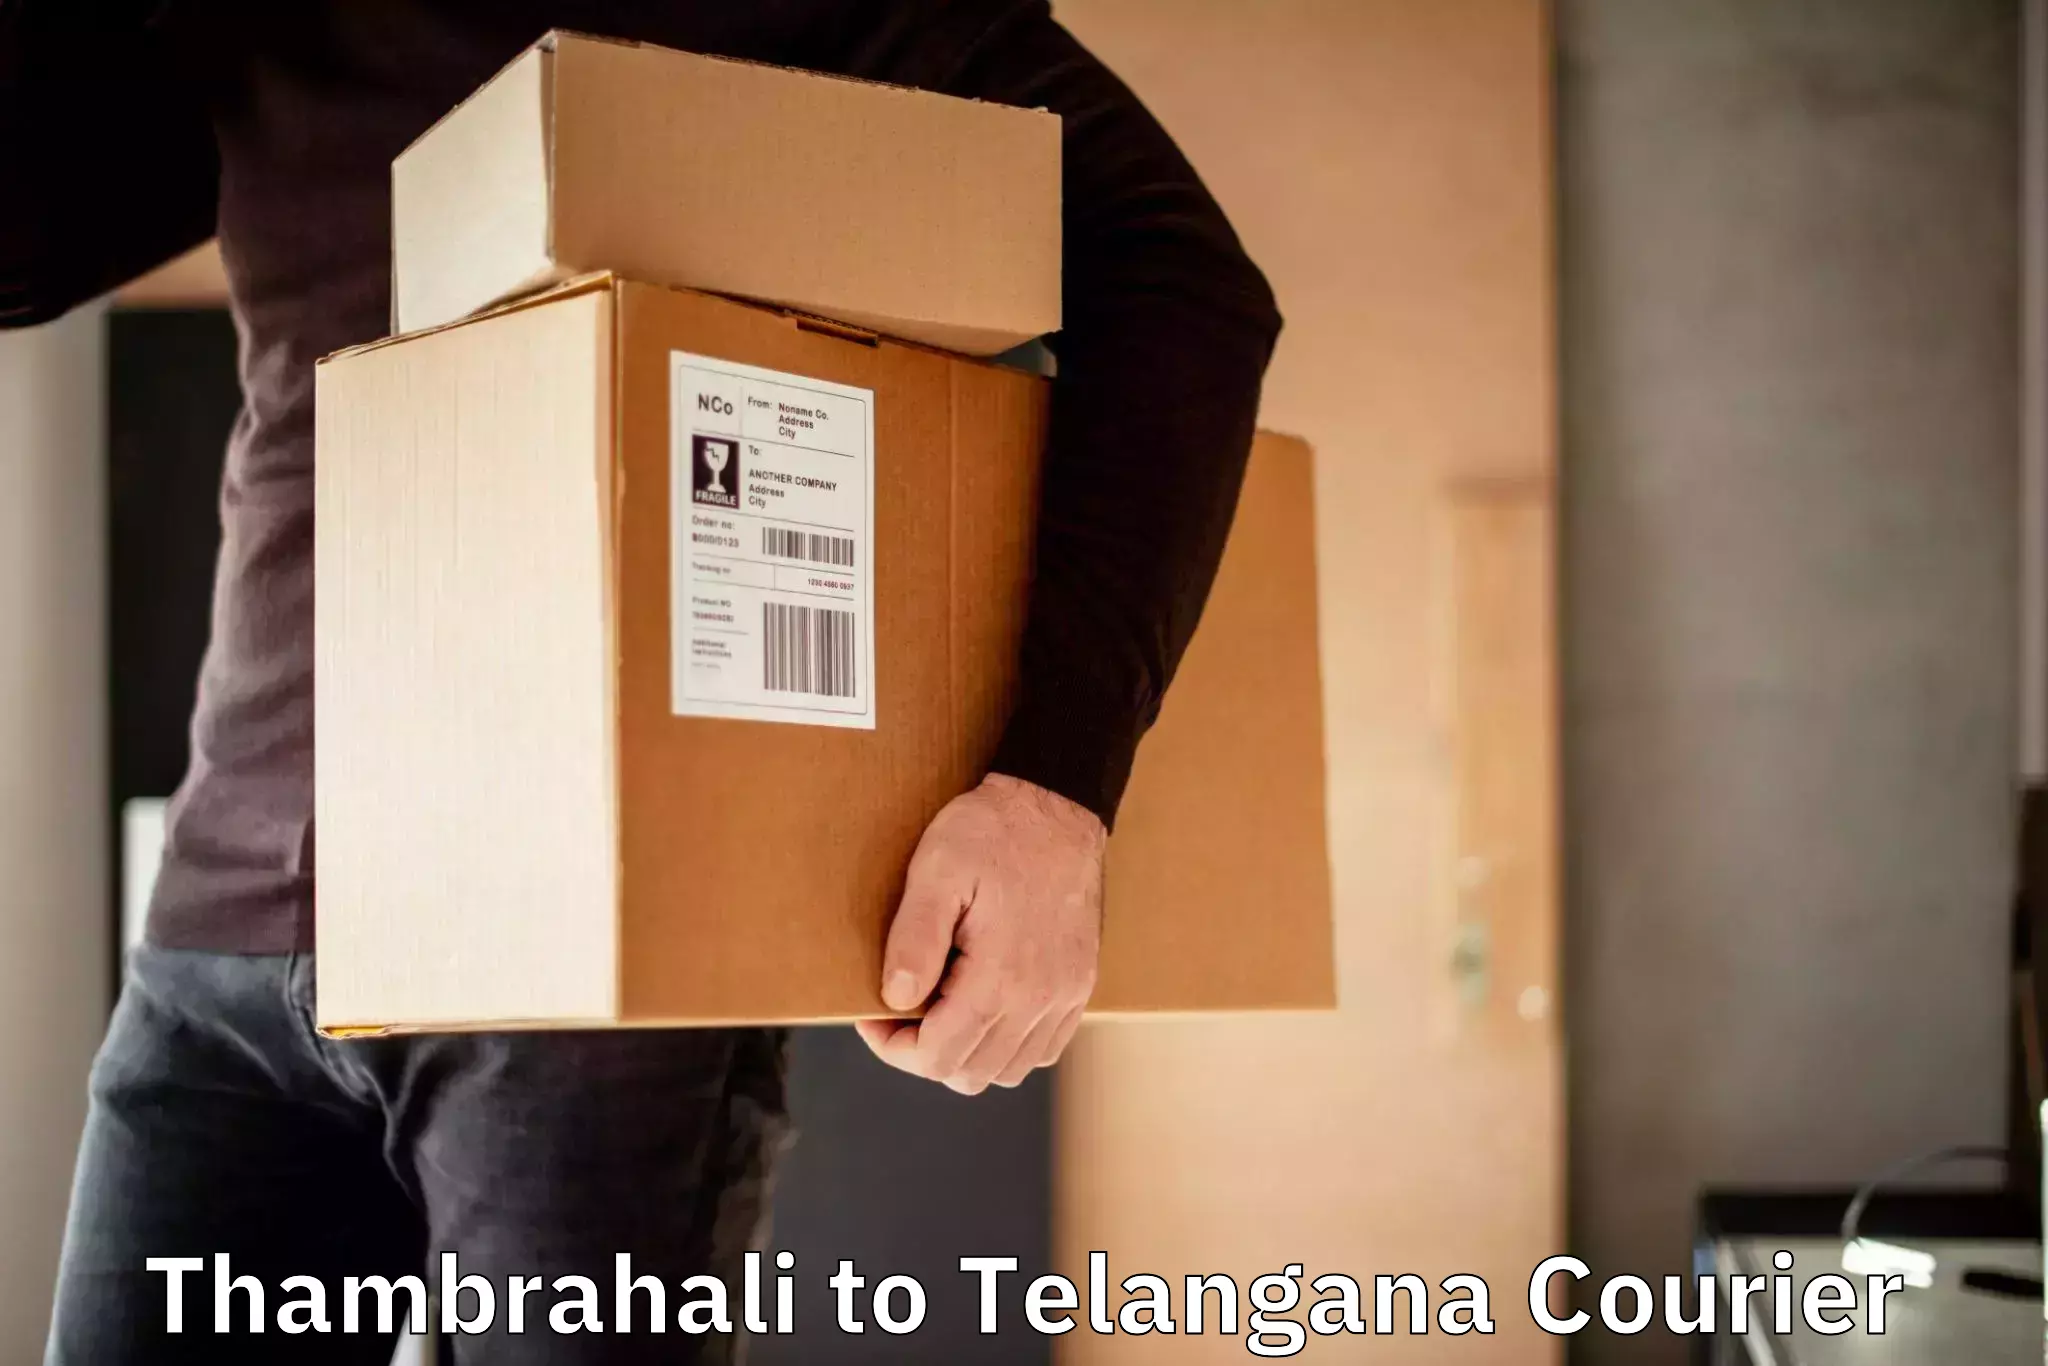 Reliable delivery network Thambrahali to Manopad